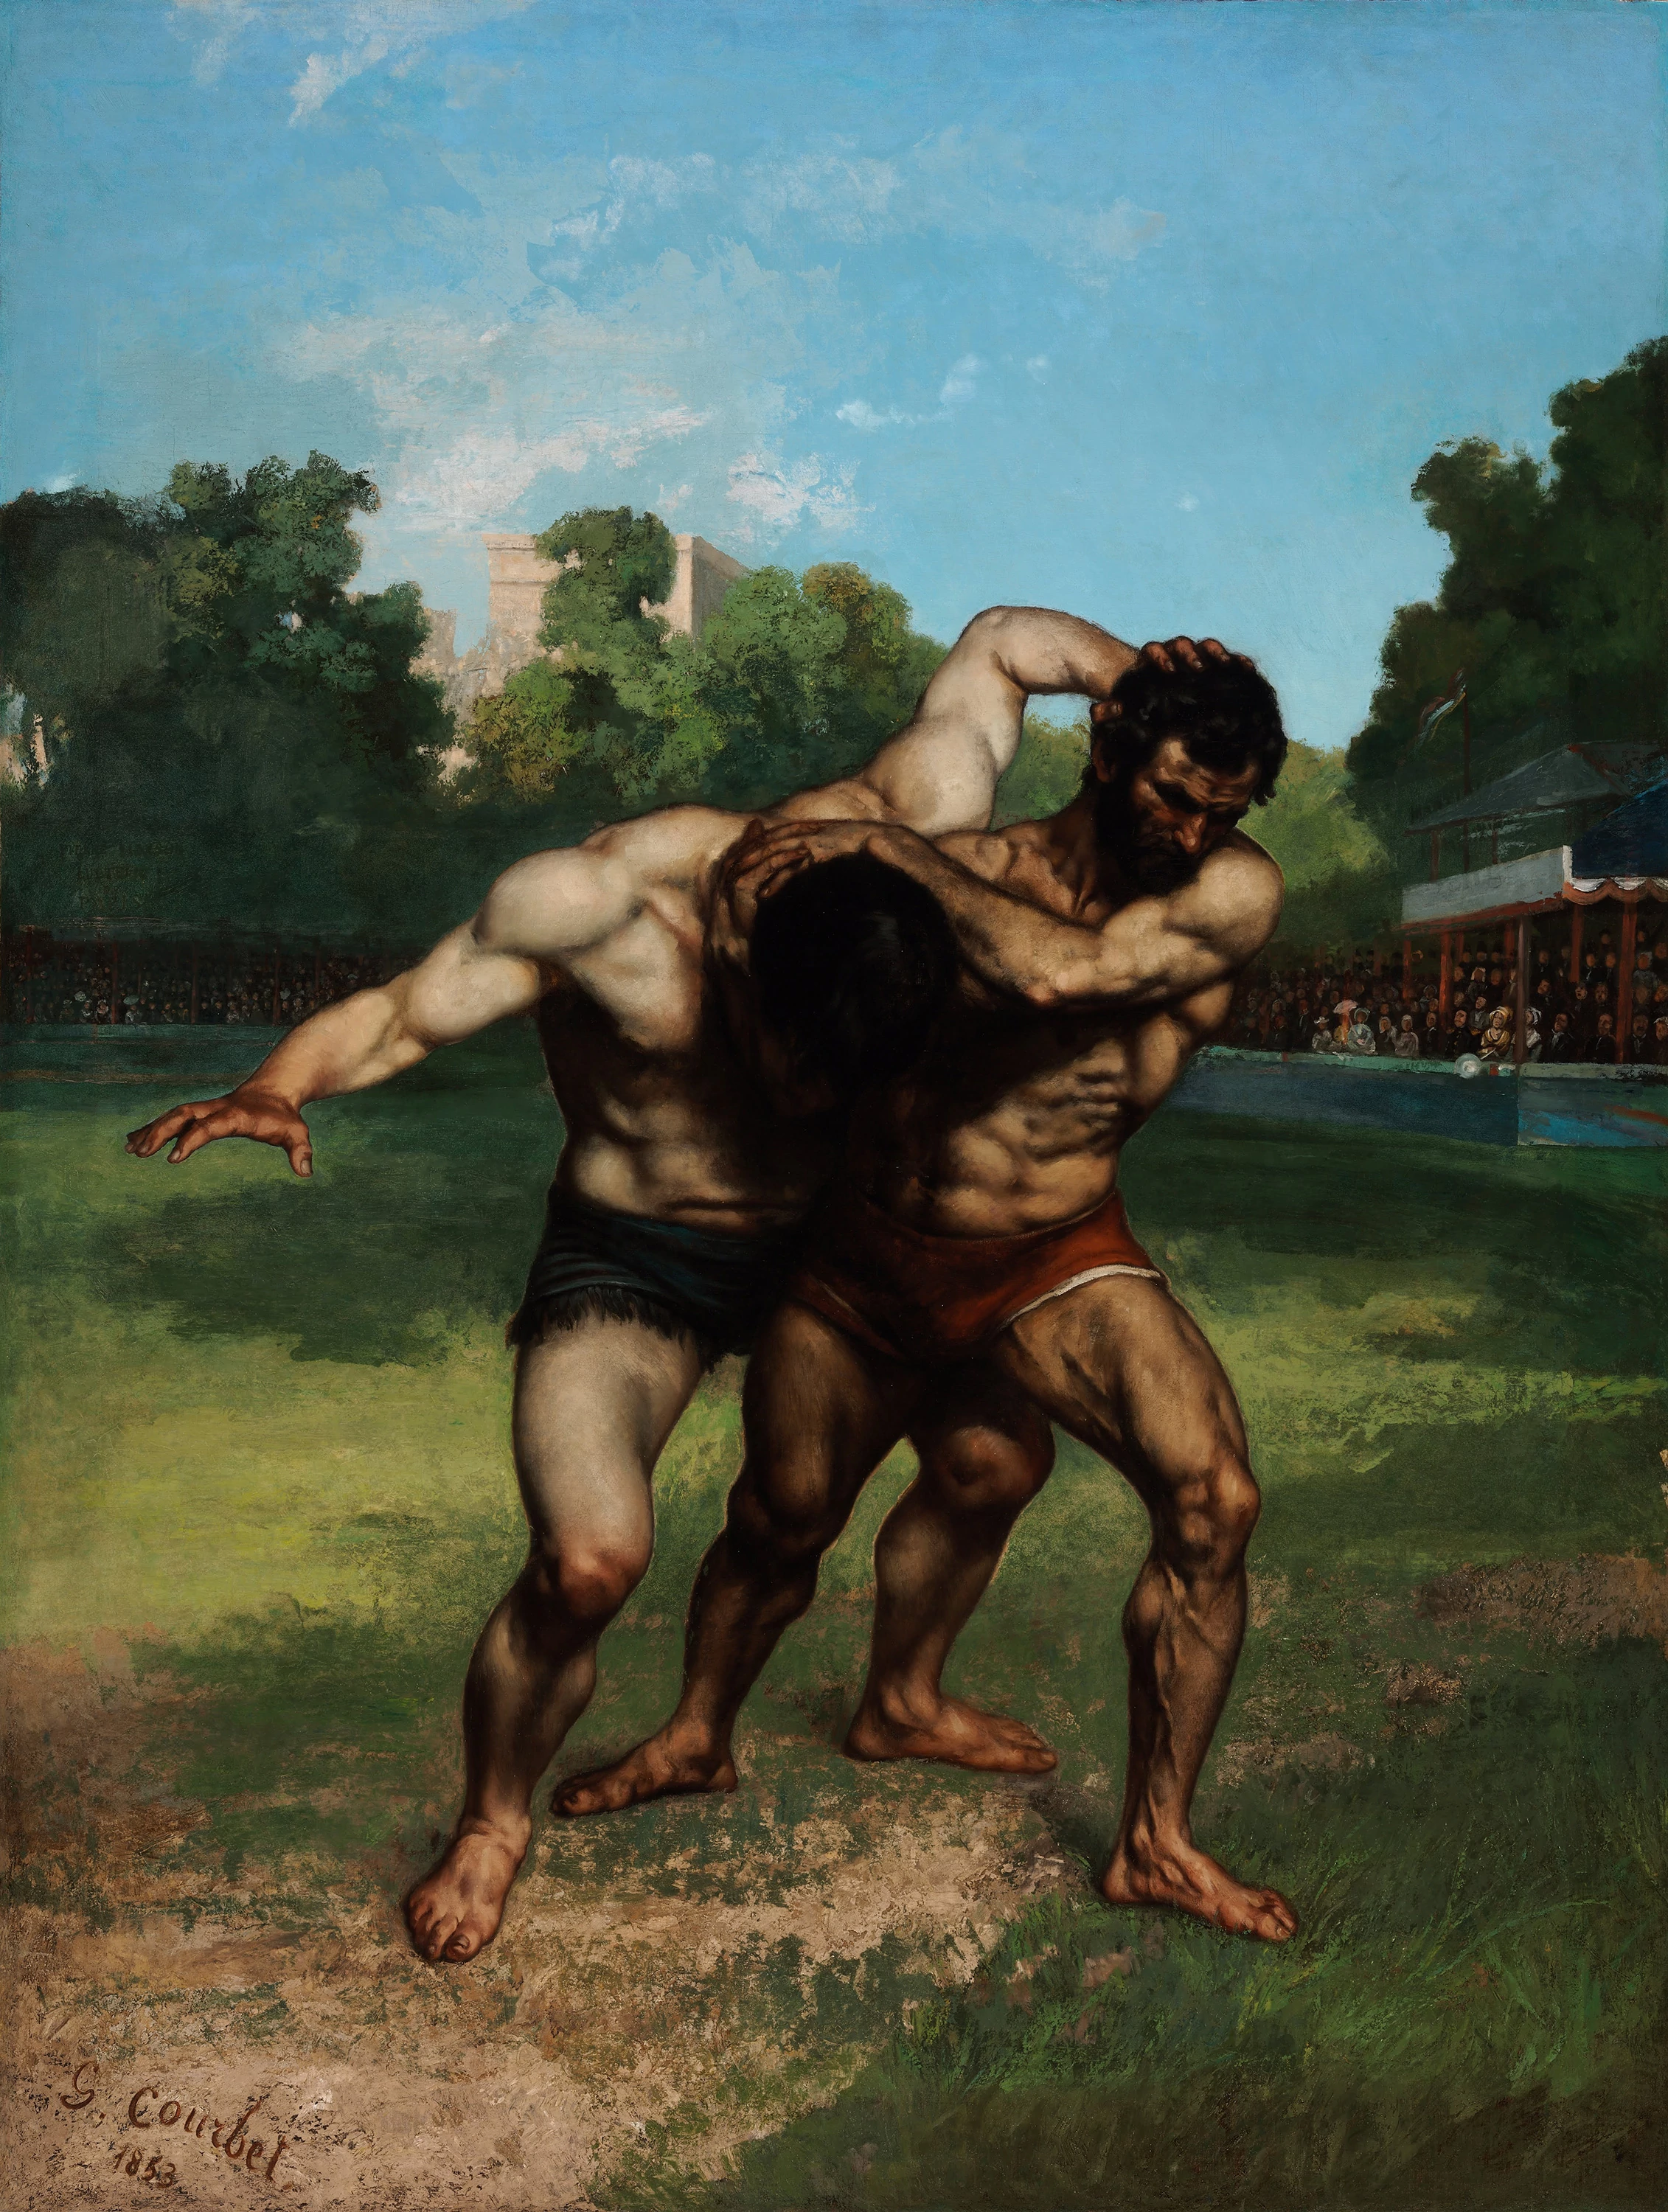 The Wrestlers, Gustave Courbet